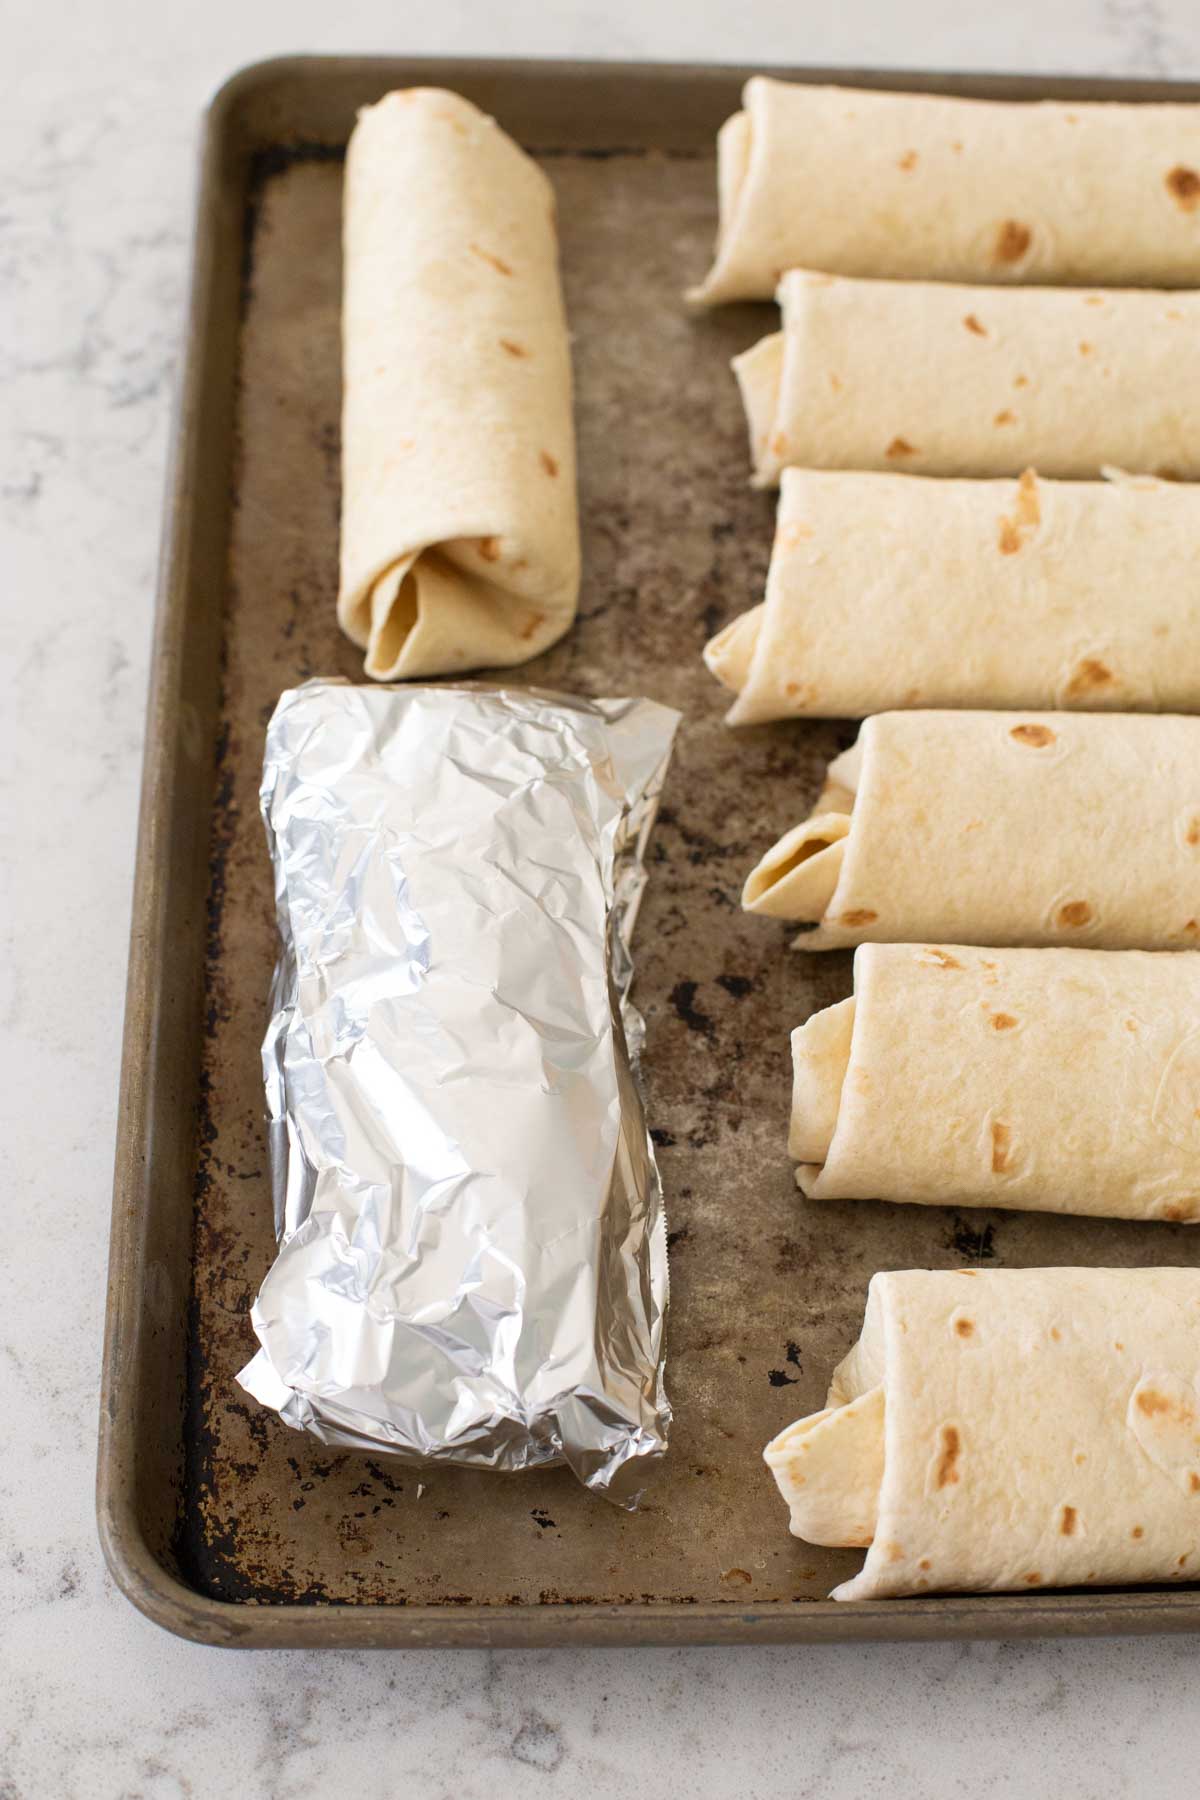 One of the chimichangas is wrapped in aluminum foil for the freezer.